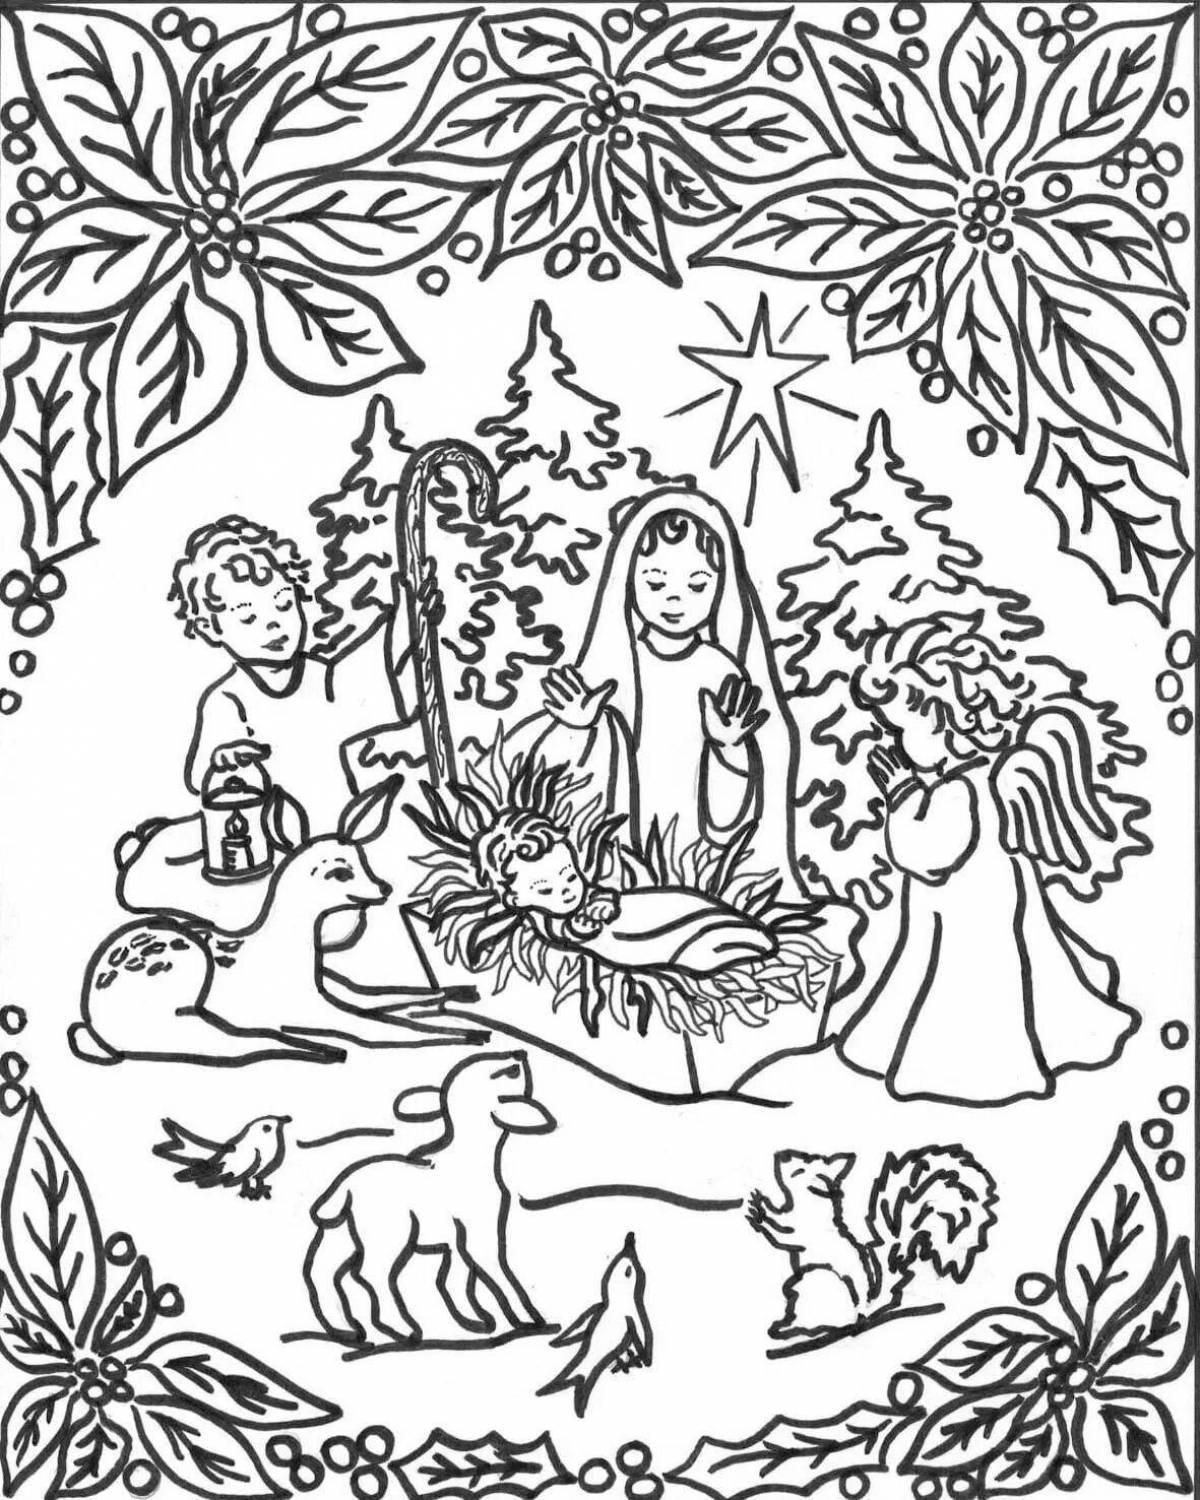 Exquisite Christmas Eve coloring book